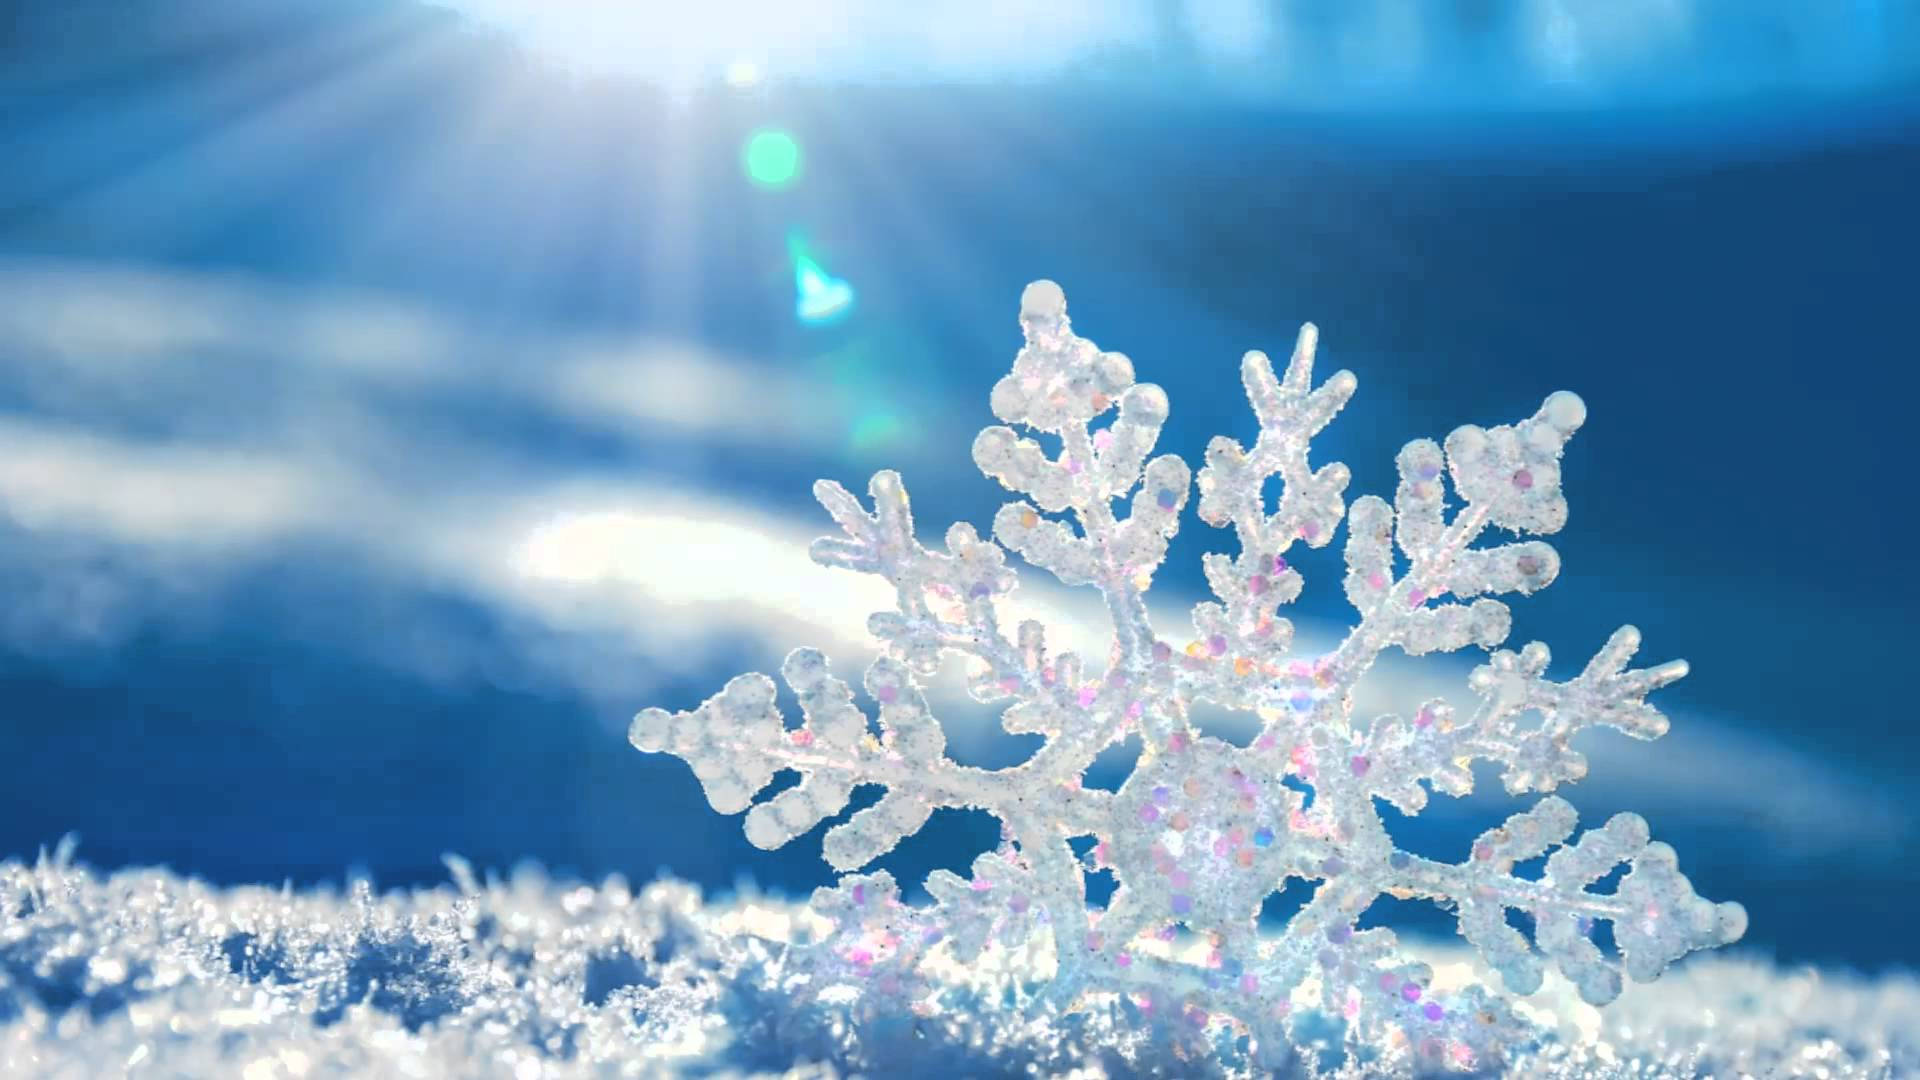 Snow Aesthetic Wallpaper Images